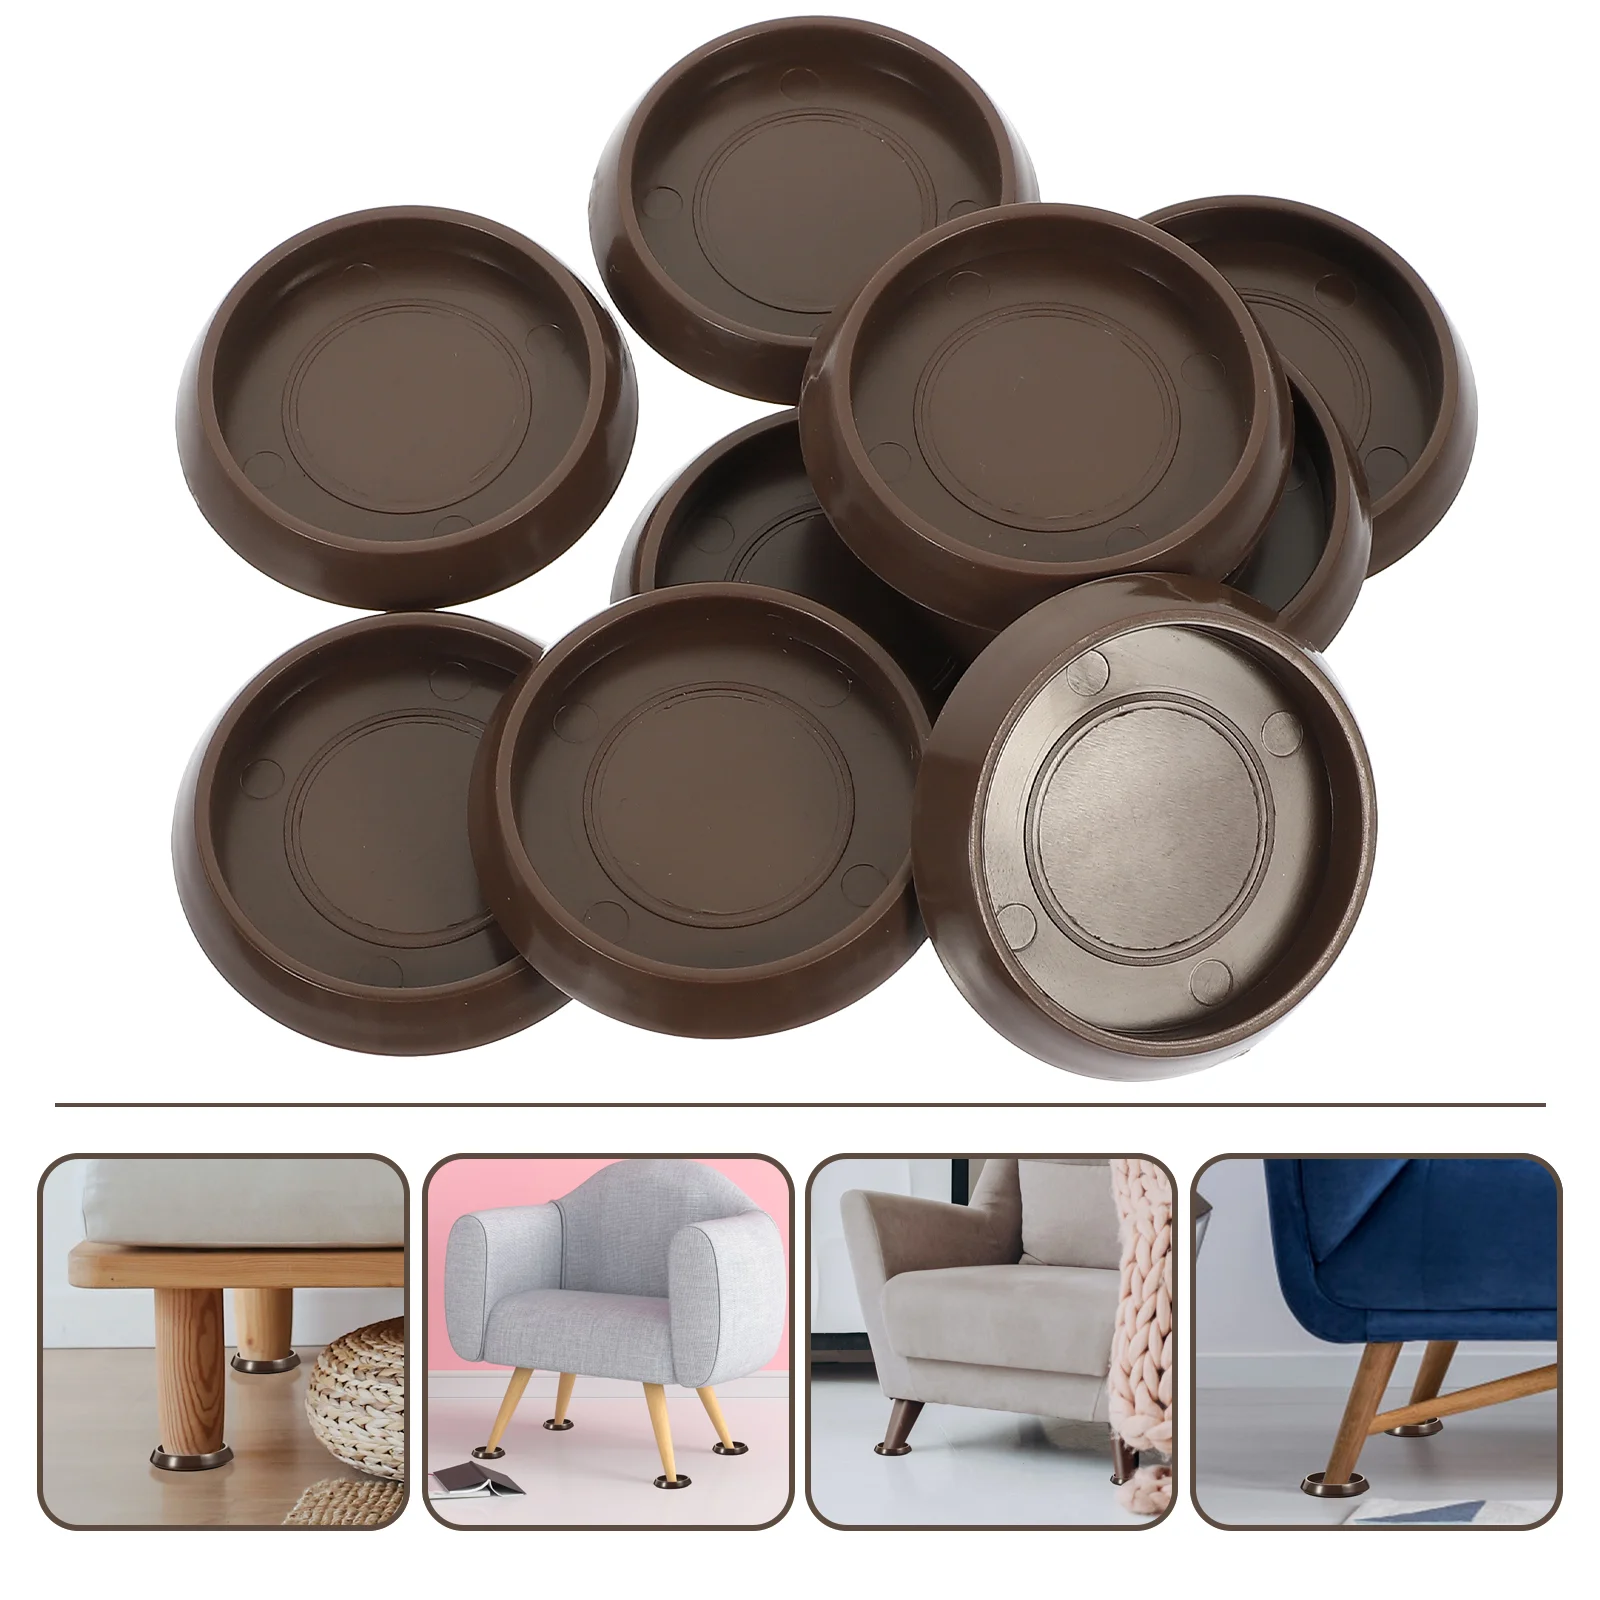 

Furniture Chair Coaster Cups Wheel Caster Pads Round Carpet Stopper Non Coasters Rubber Leg Floor Plastic Pad Protector Piano